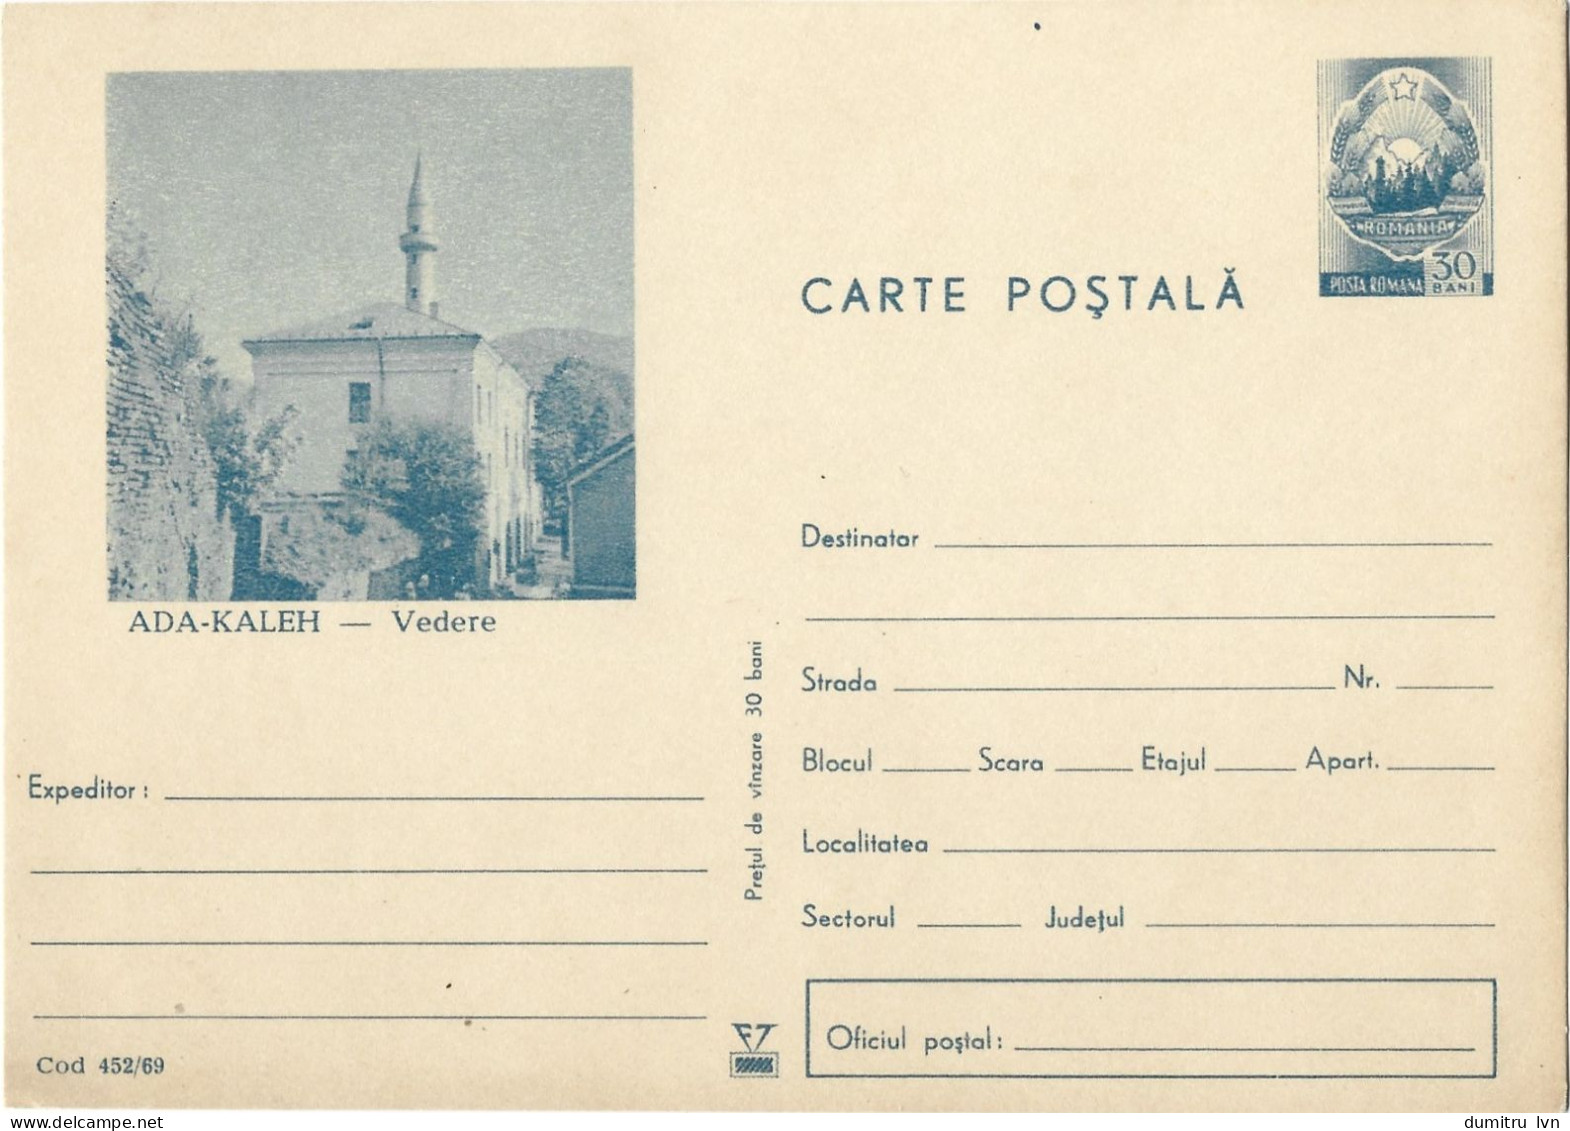 ROMANIA 1969 ADA-KALEH VIEW, MOSQUE, ARCHITECTURE, PEOPLE, POSTAL STATIONERY - Postal Stationery